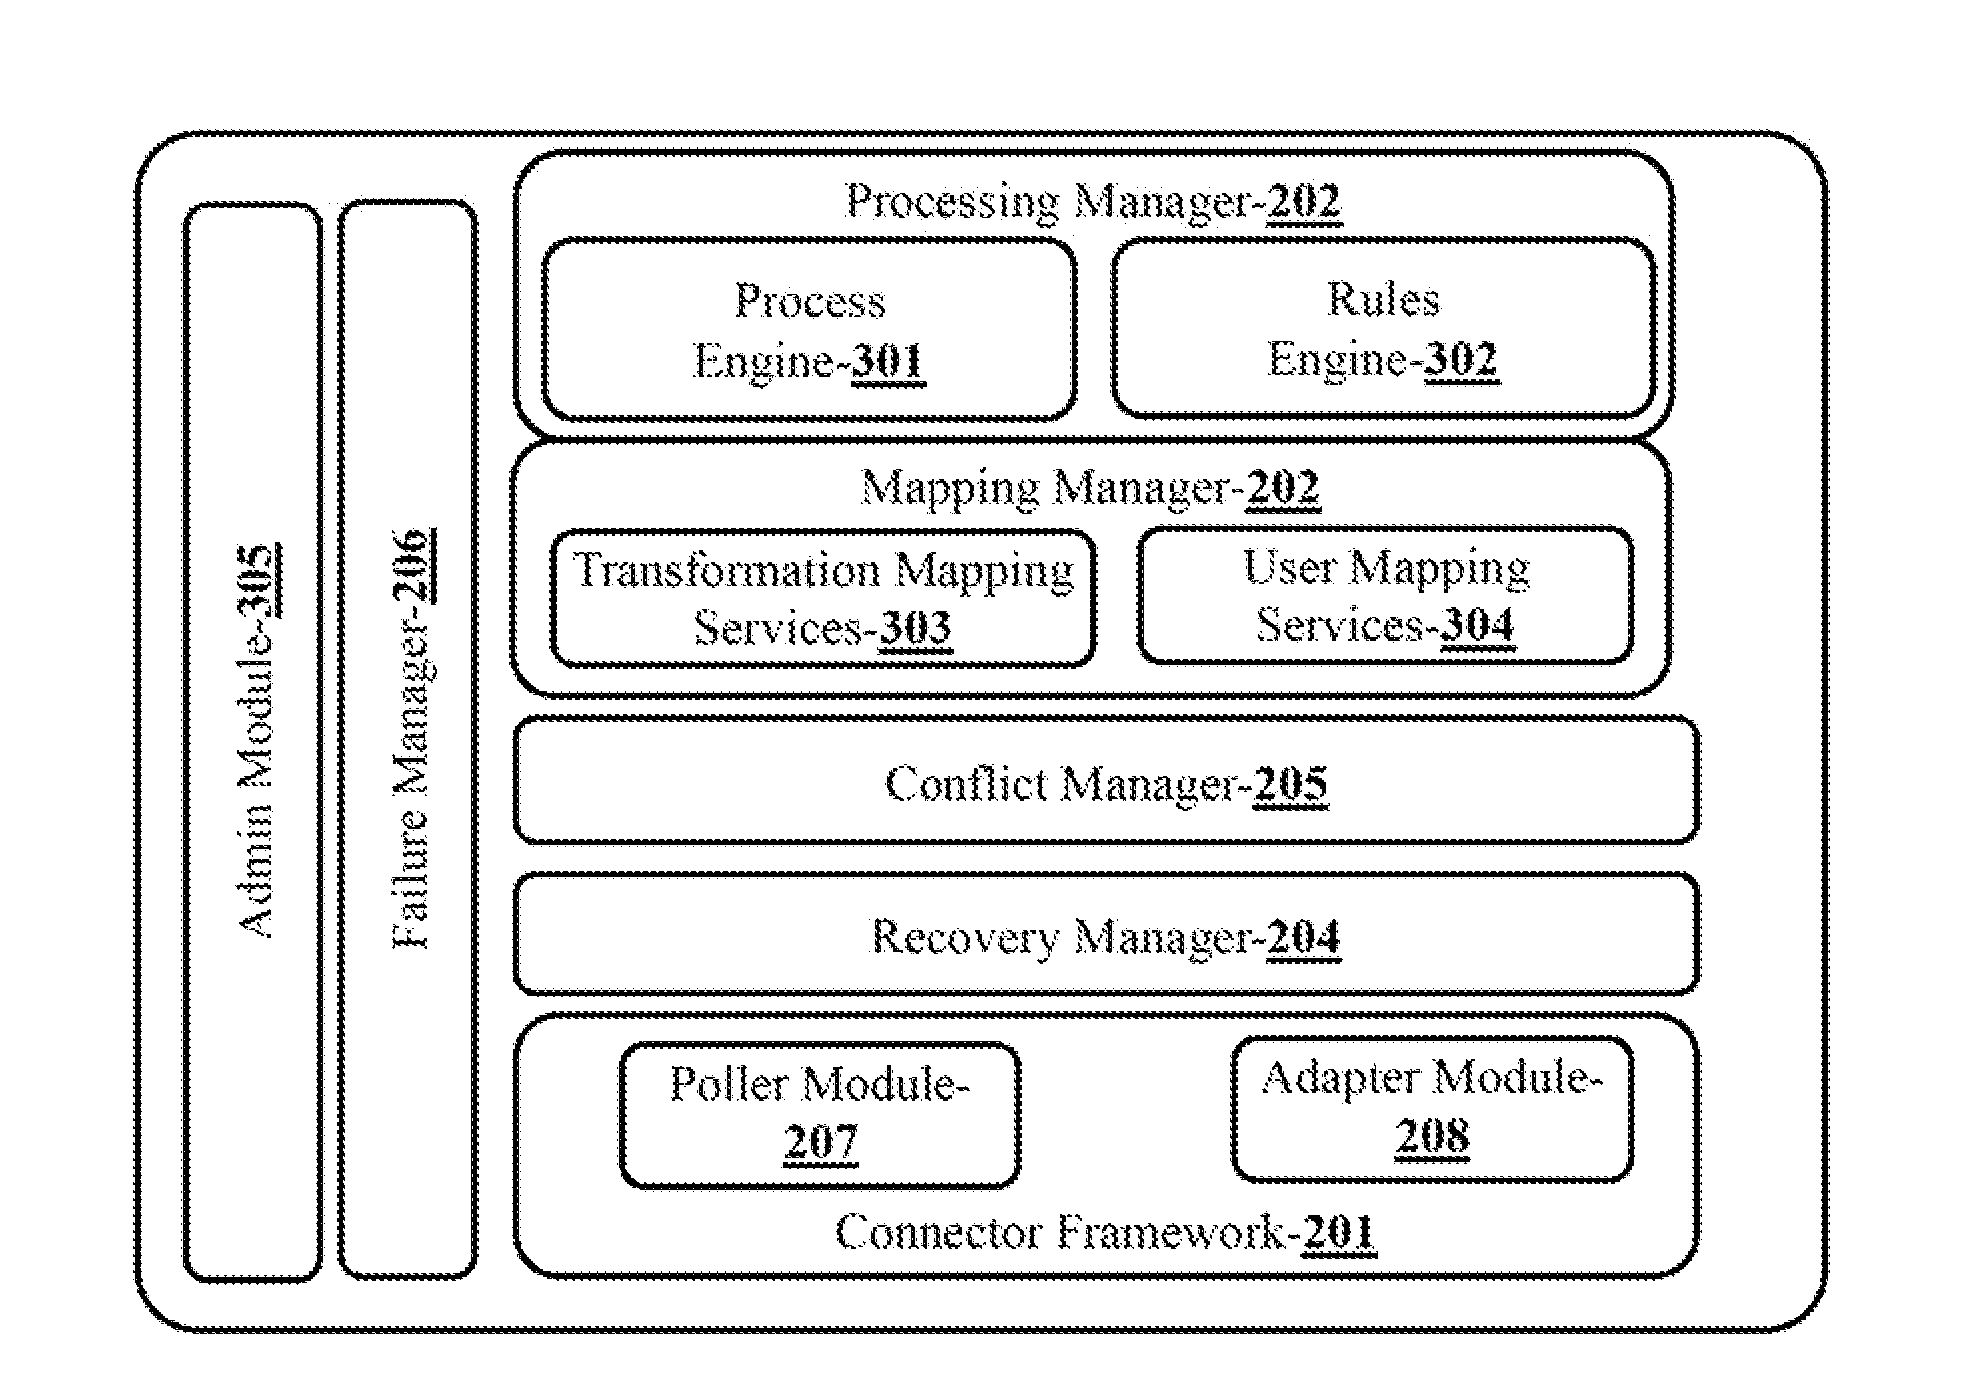 Method and  A System for Synchronizing Data